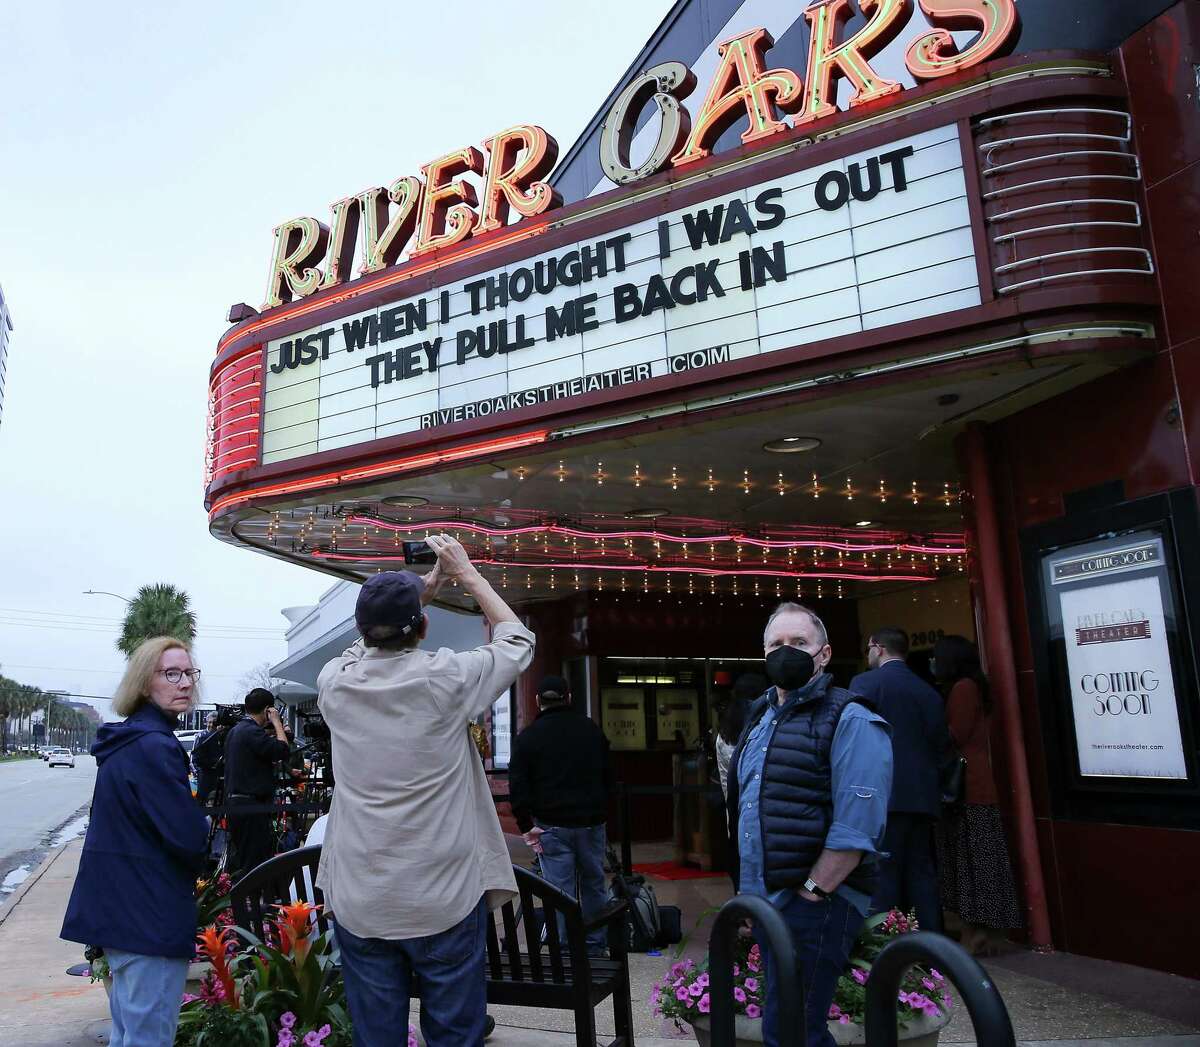 Media and attendees gather around the River Oaks Theater during a press conference announcing the small movie theater reopening in Houston on Wednesday, Feb. 2, 2022.